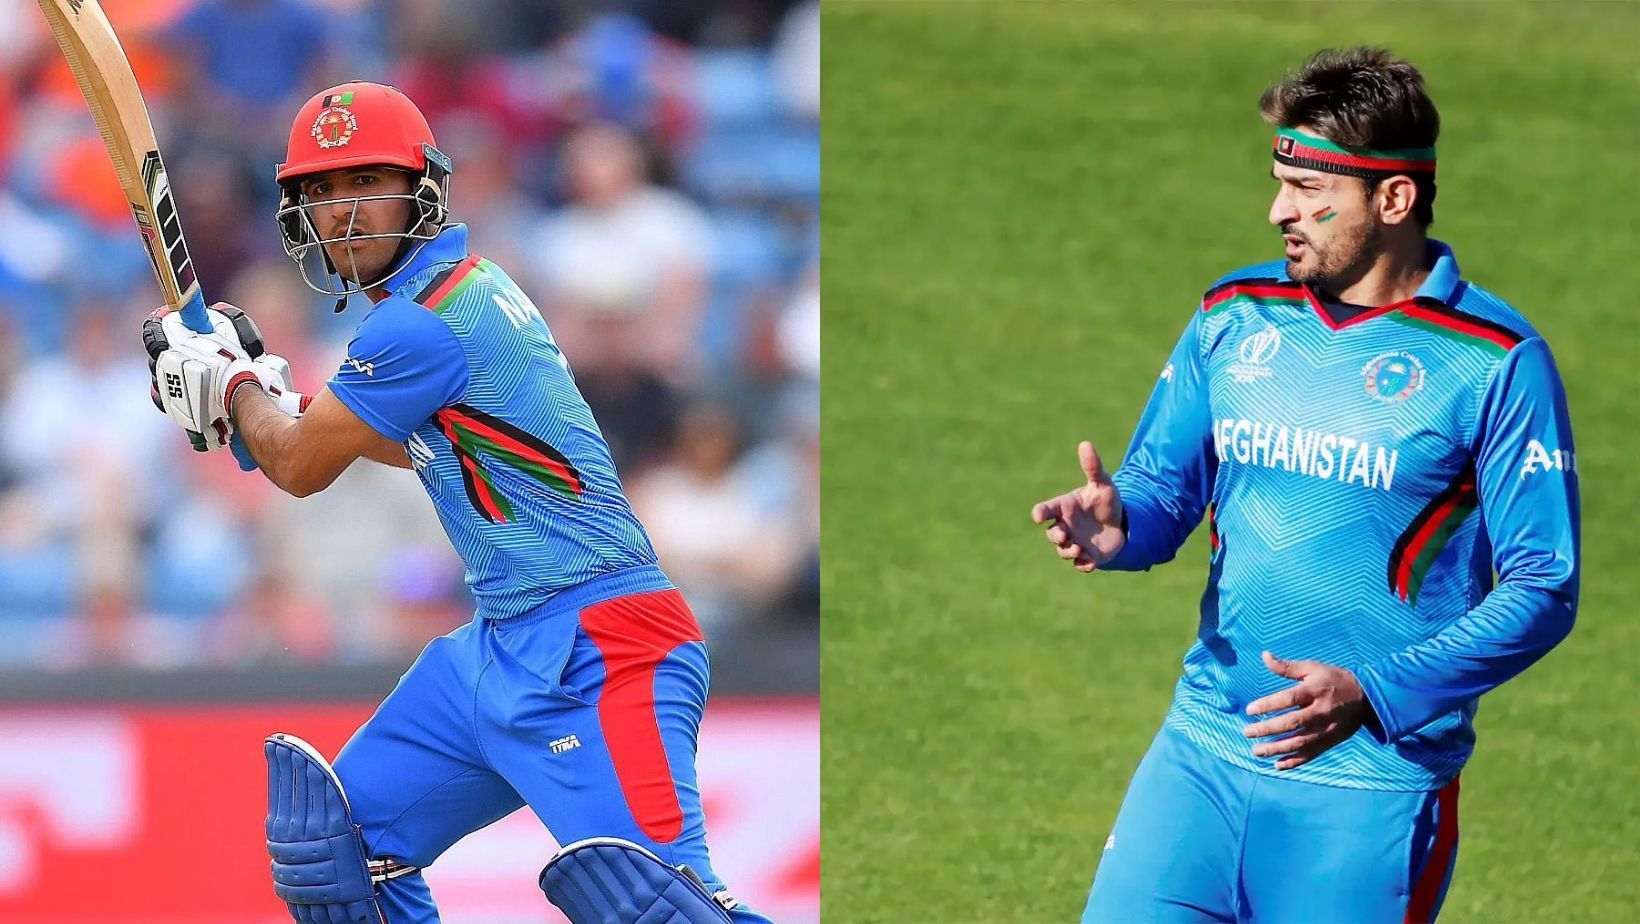 Najibullah Zadran and Hamid Hassan have plied their trade for a number of years internationally.